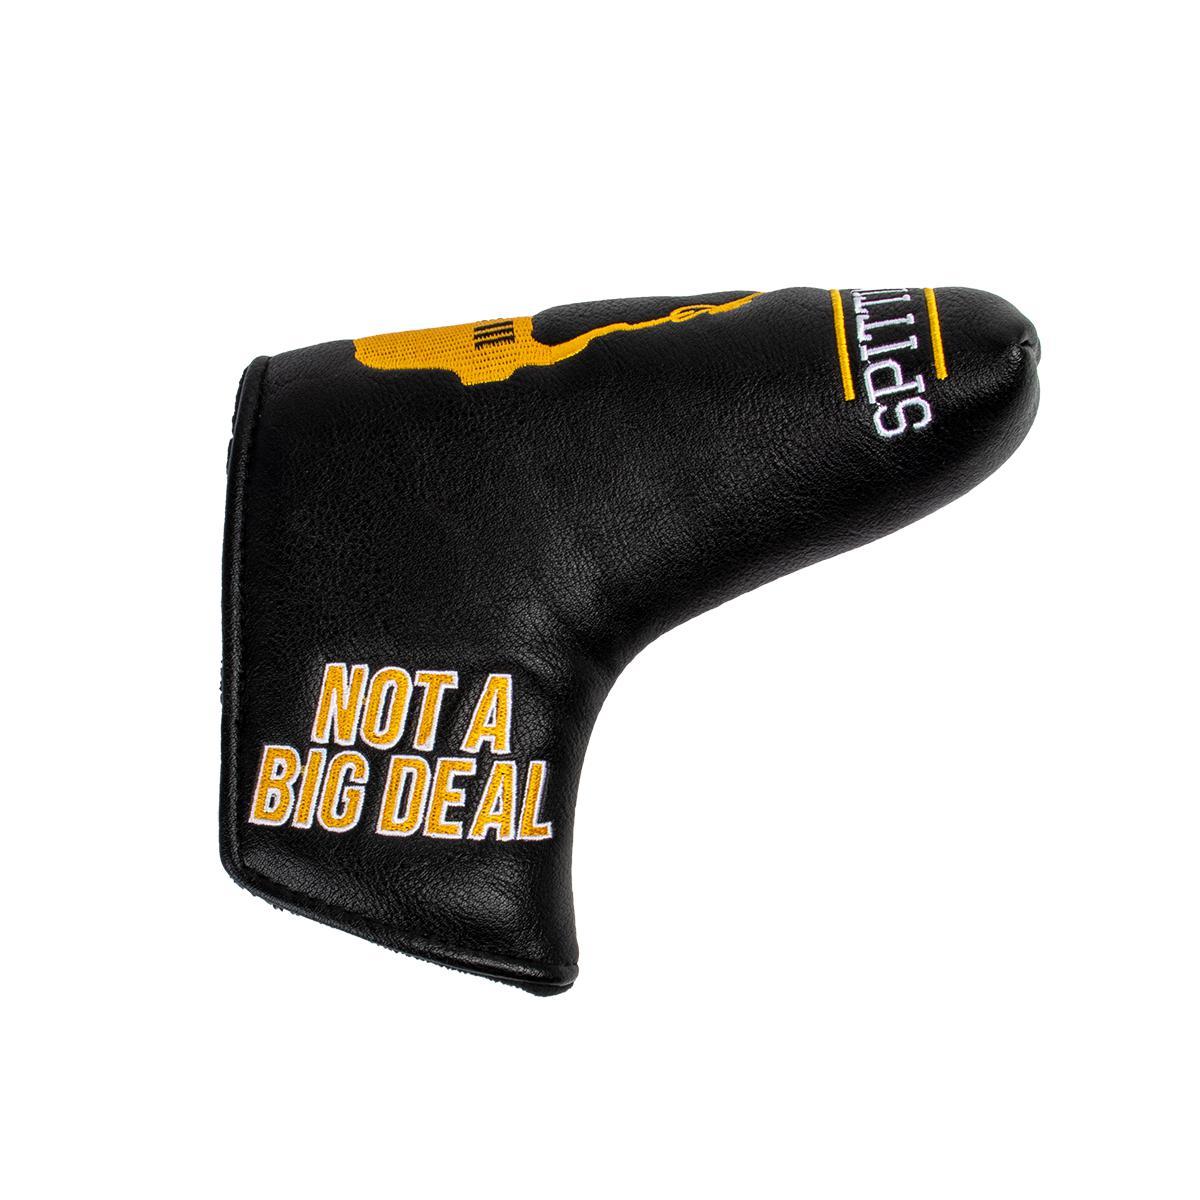 Spittin Chiclets Blade Putter Cover